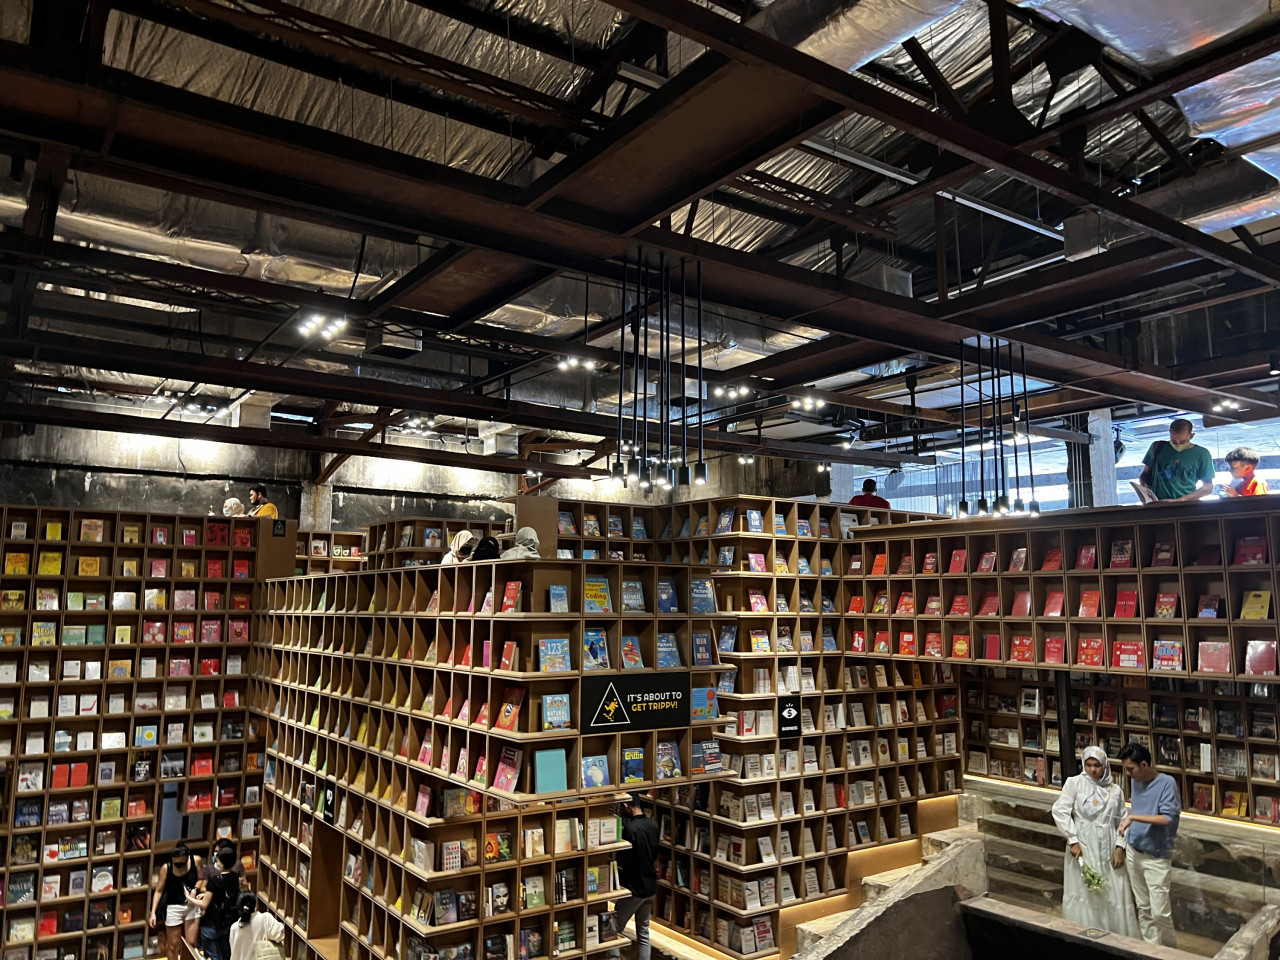 While it might not seem like it takes a lot of space, the bookstore is very vertical, with stairs aplenty. The books from this vantage look like they are arranged by colour, adding to the aesthetic appeal of the store. – Haikal Fernandez pic